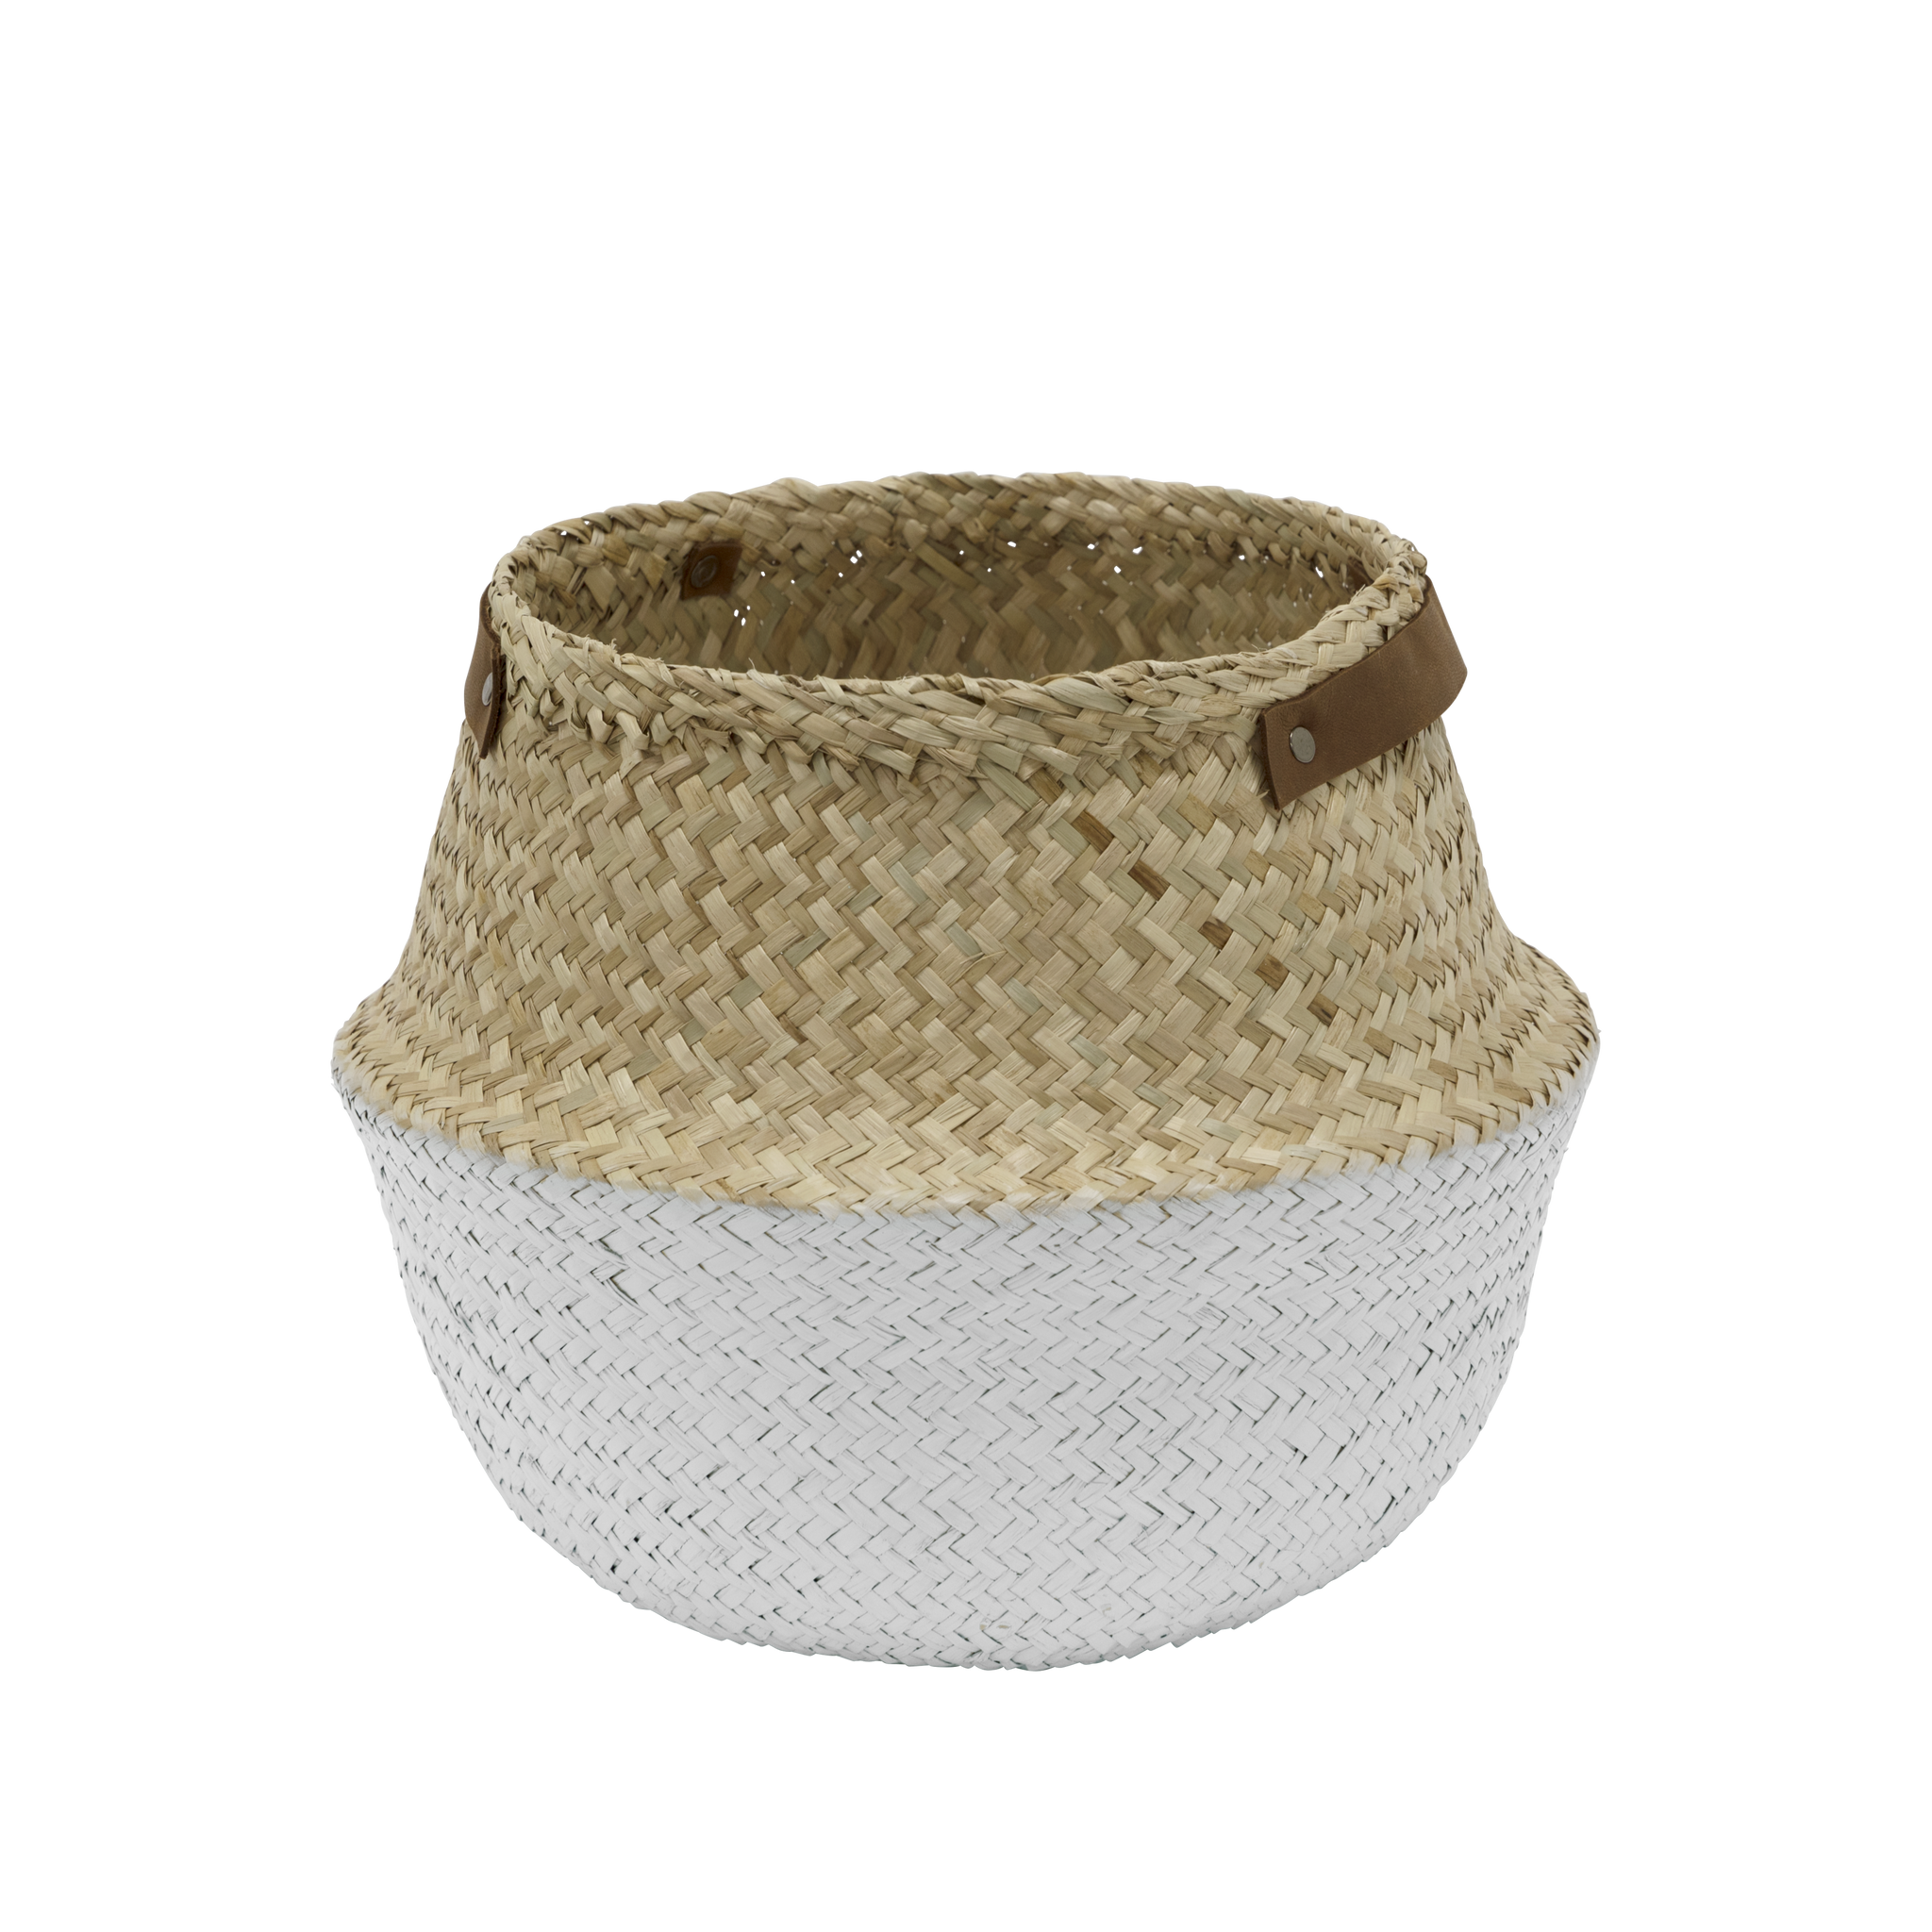 Grico Seagrass Basket - White - Stitches and Tweed 